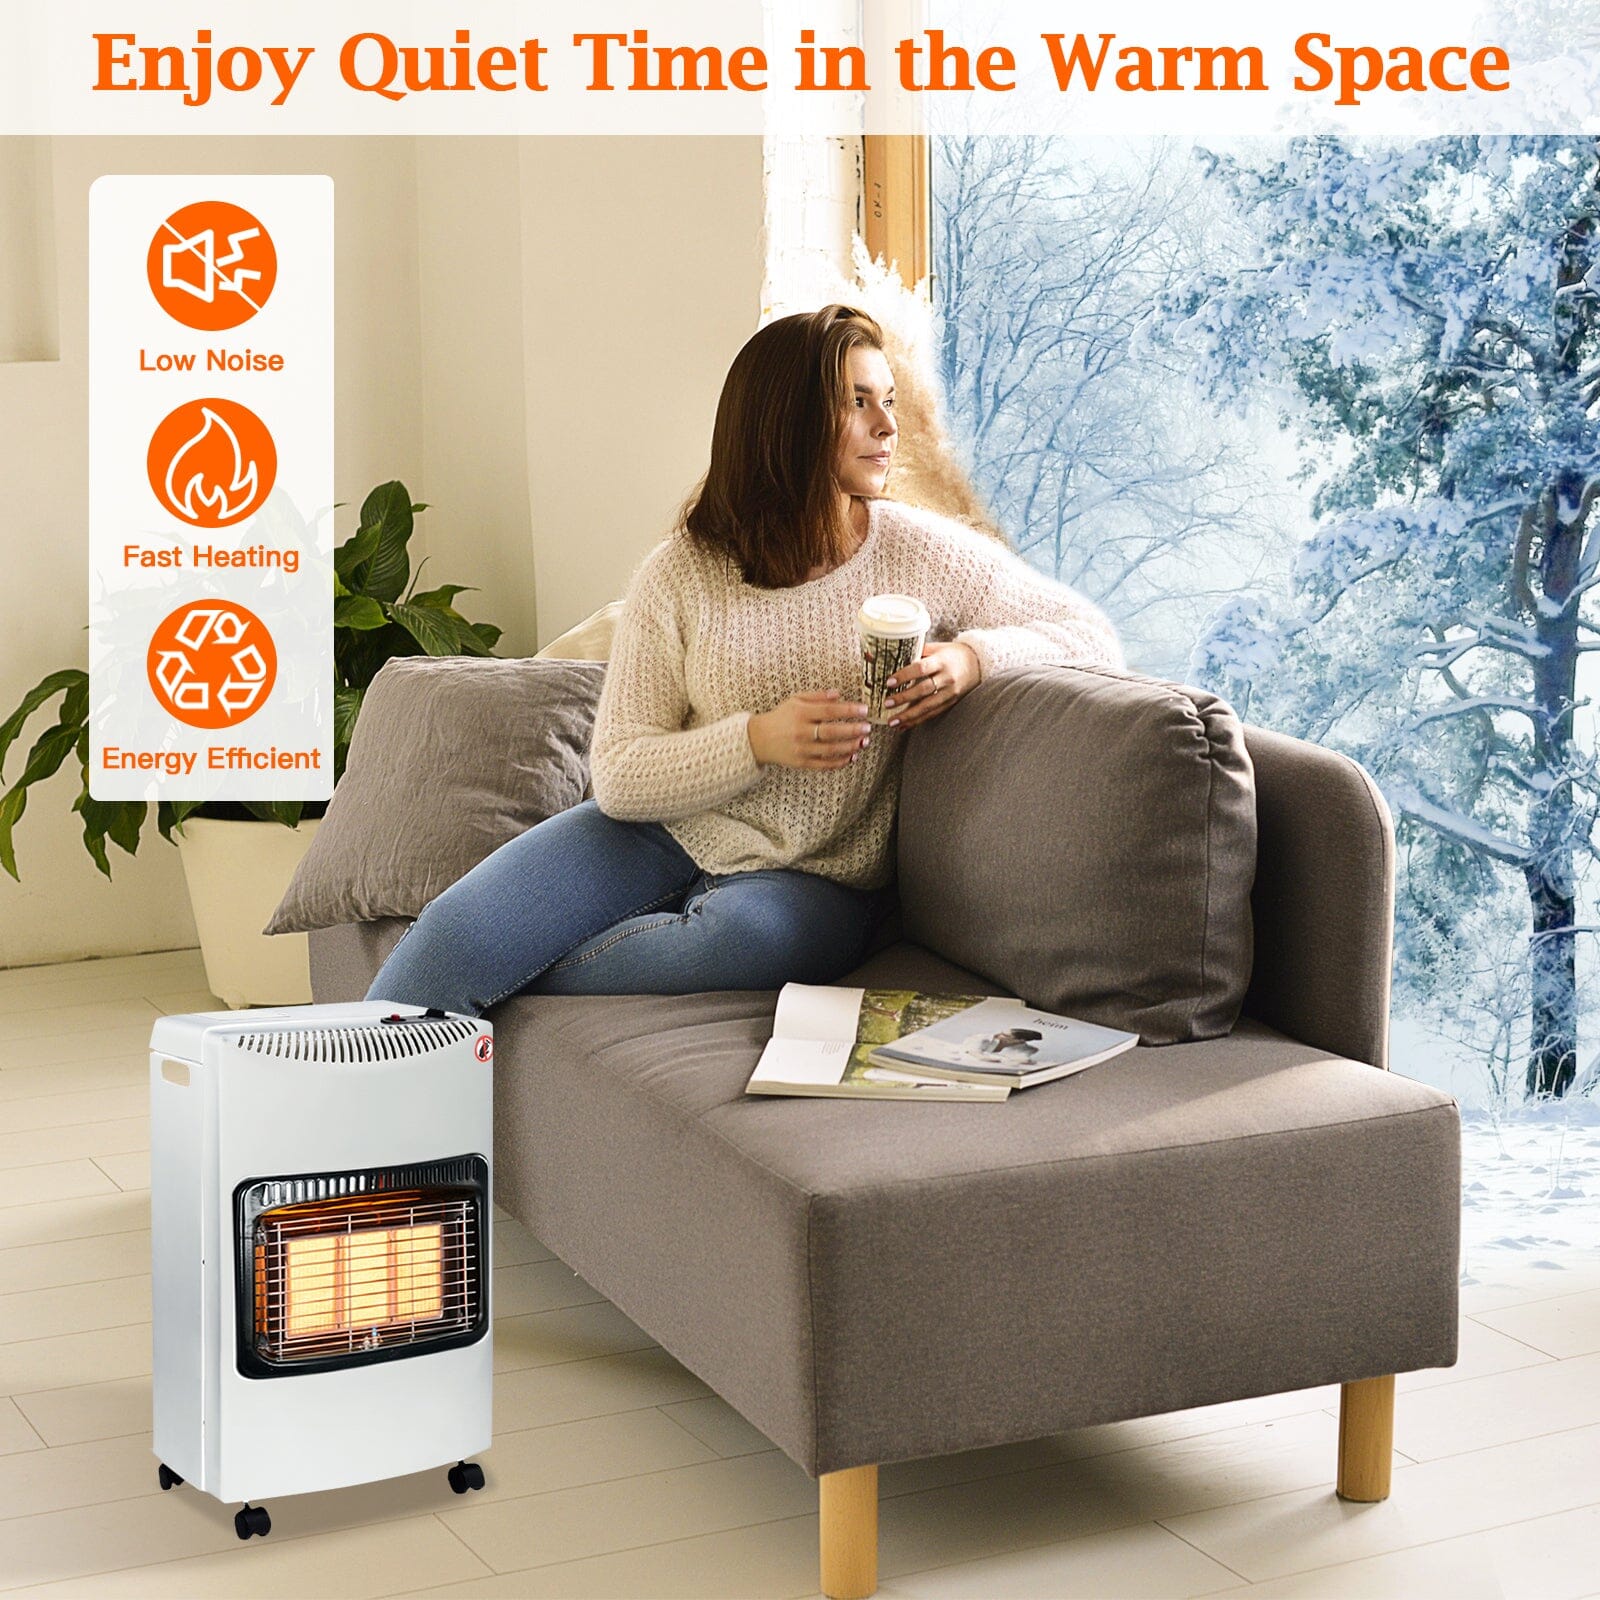 Black 4.2KW Portable Heater Free Standing Heating Cabinet Butane Gas Heater Space Heaters Living and Home 